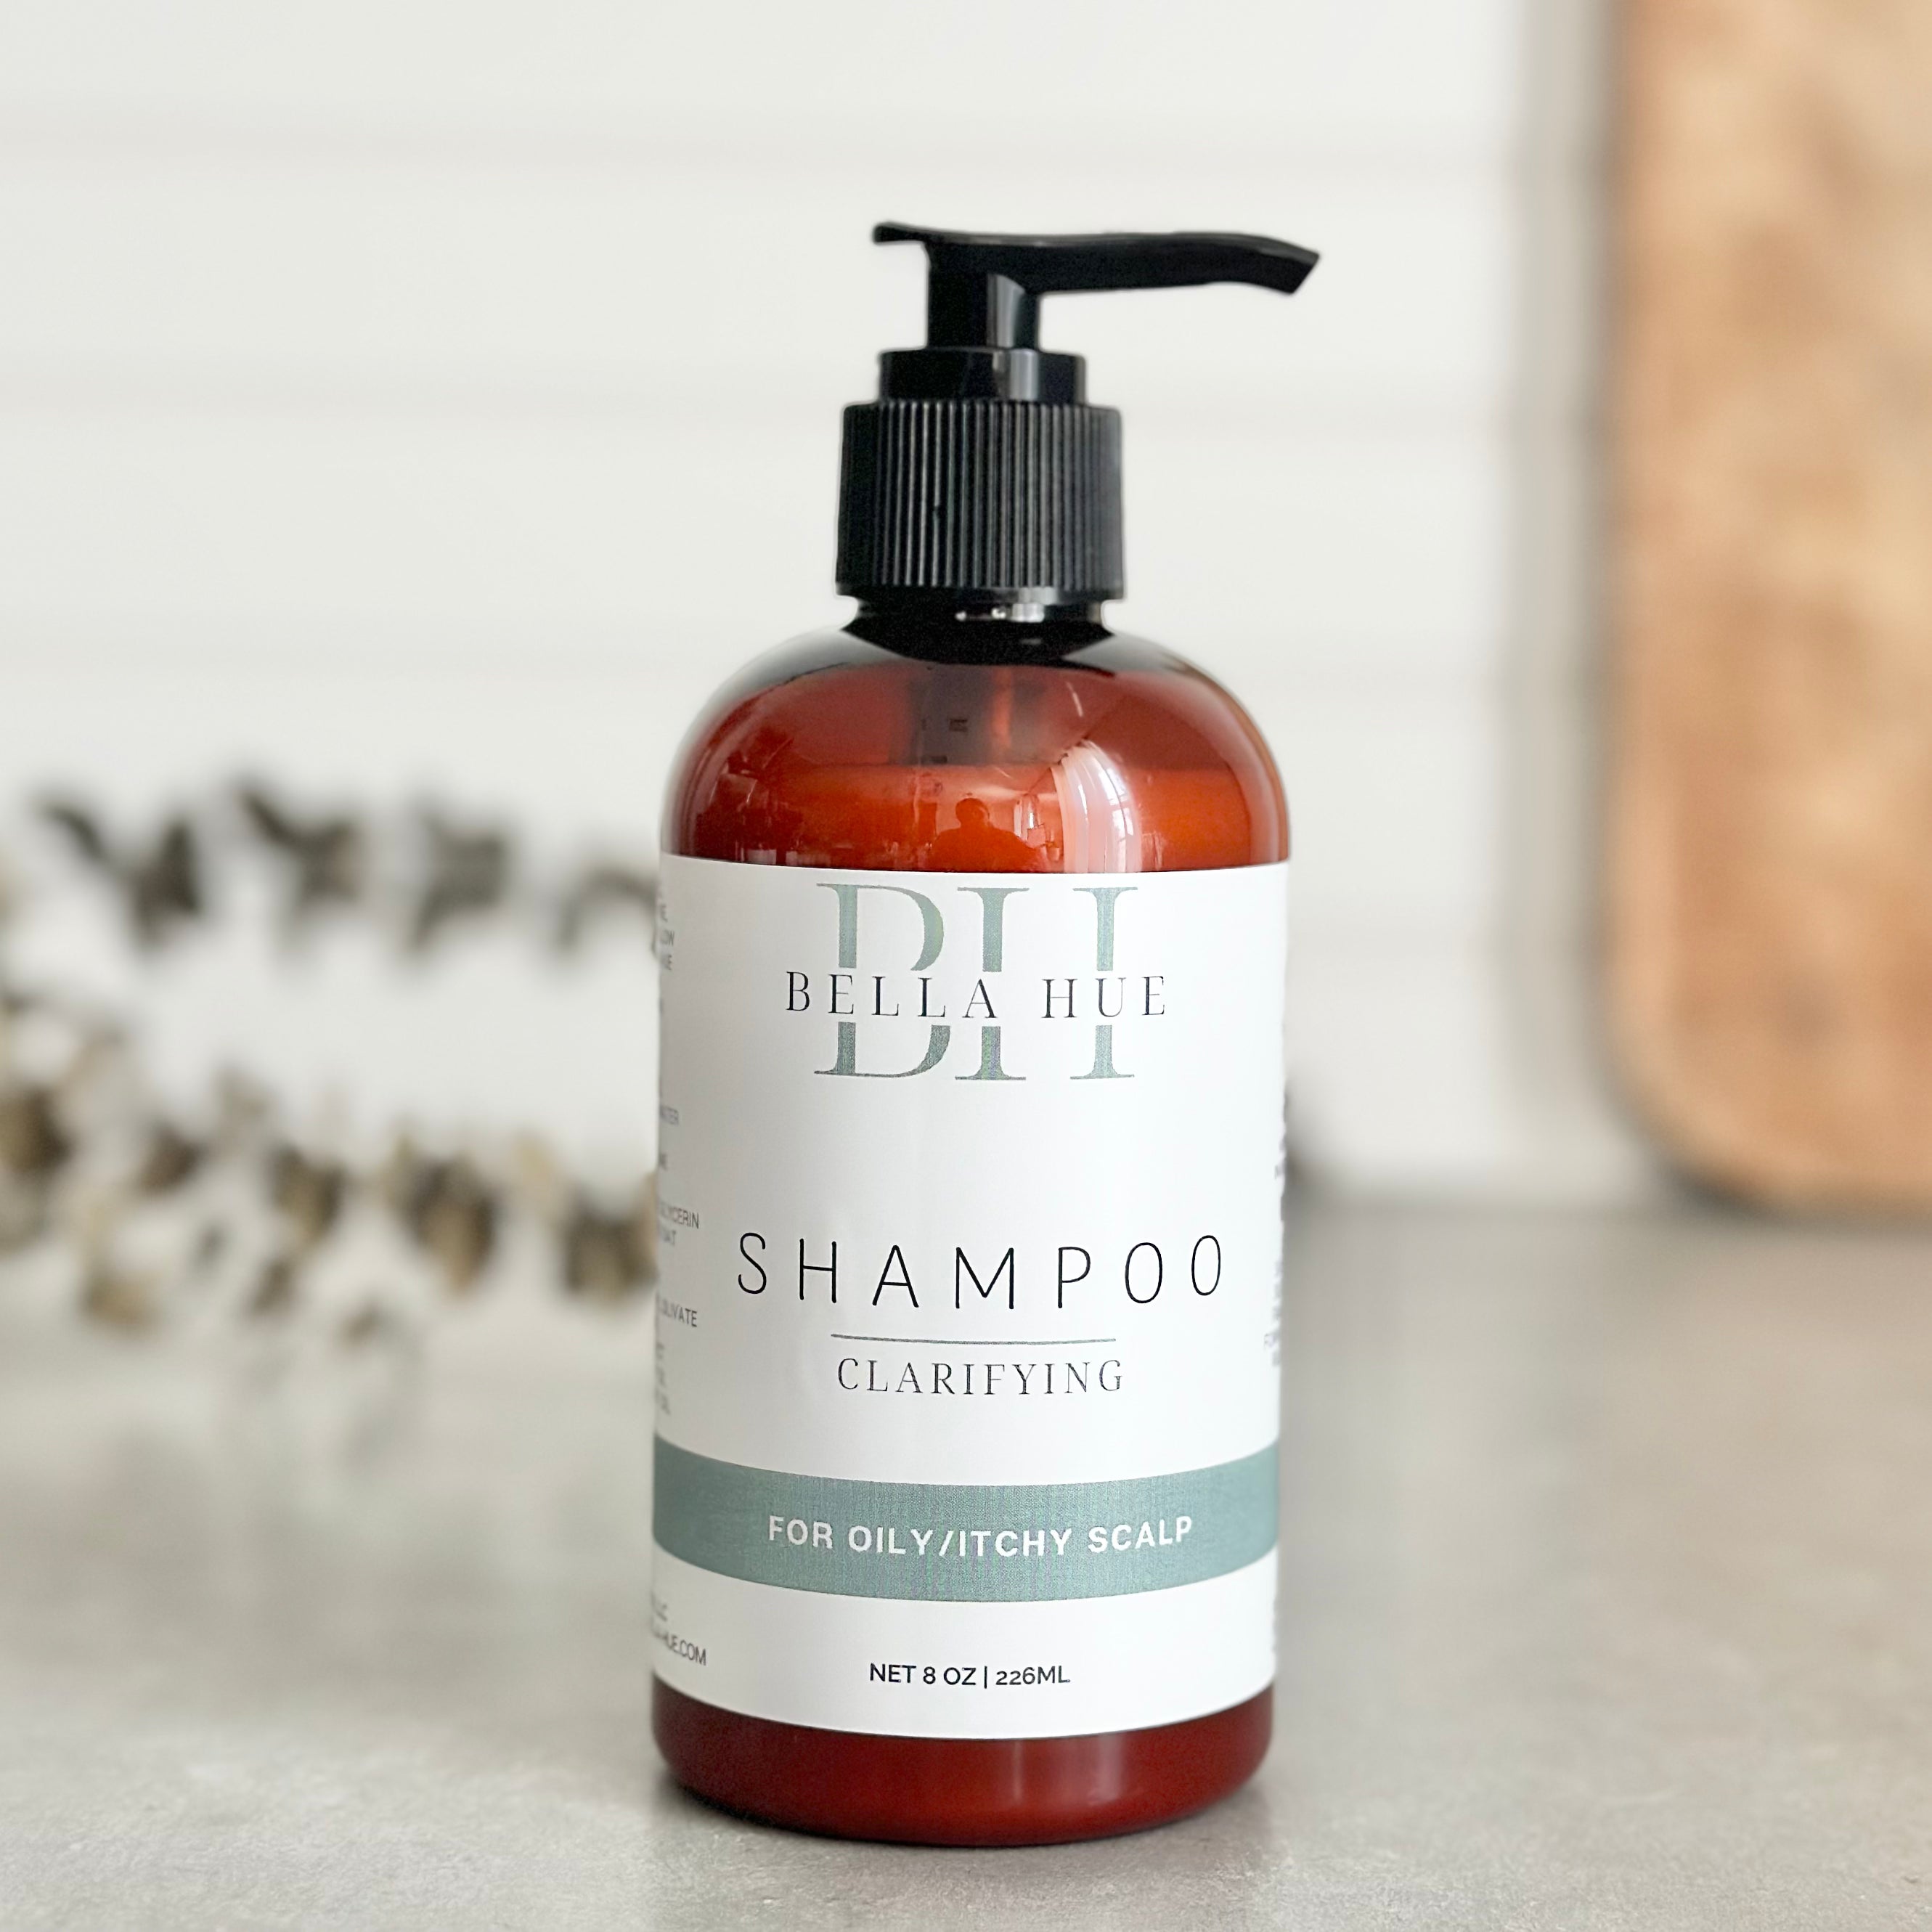 Clarifying Shampoo (For Oily/Itchy Scalp)